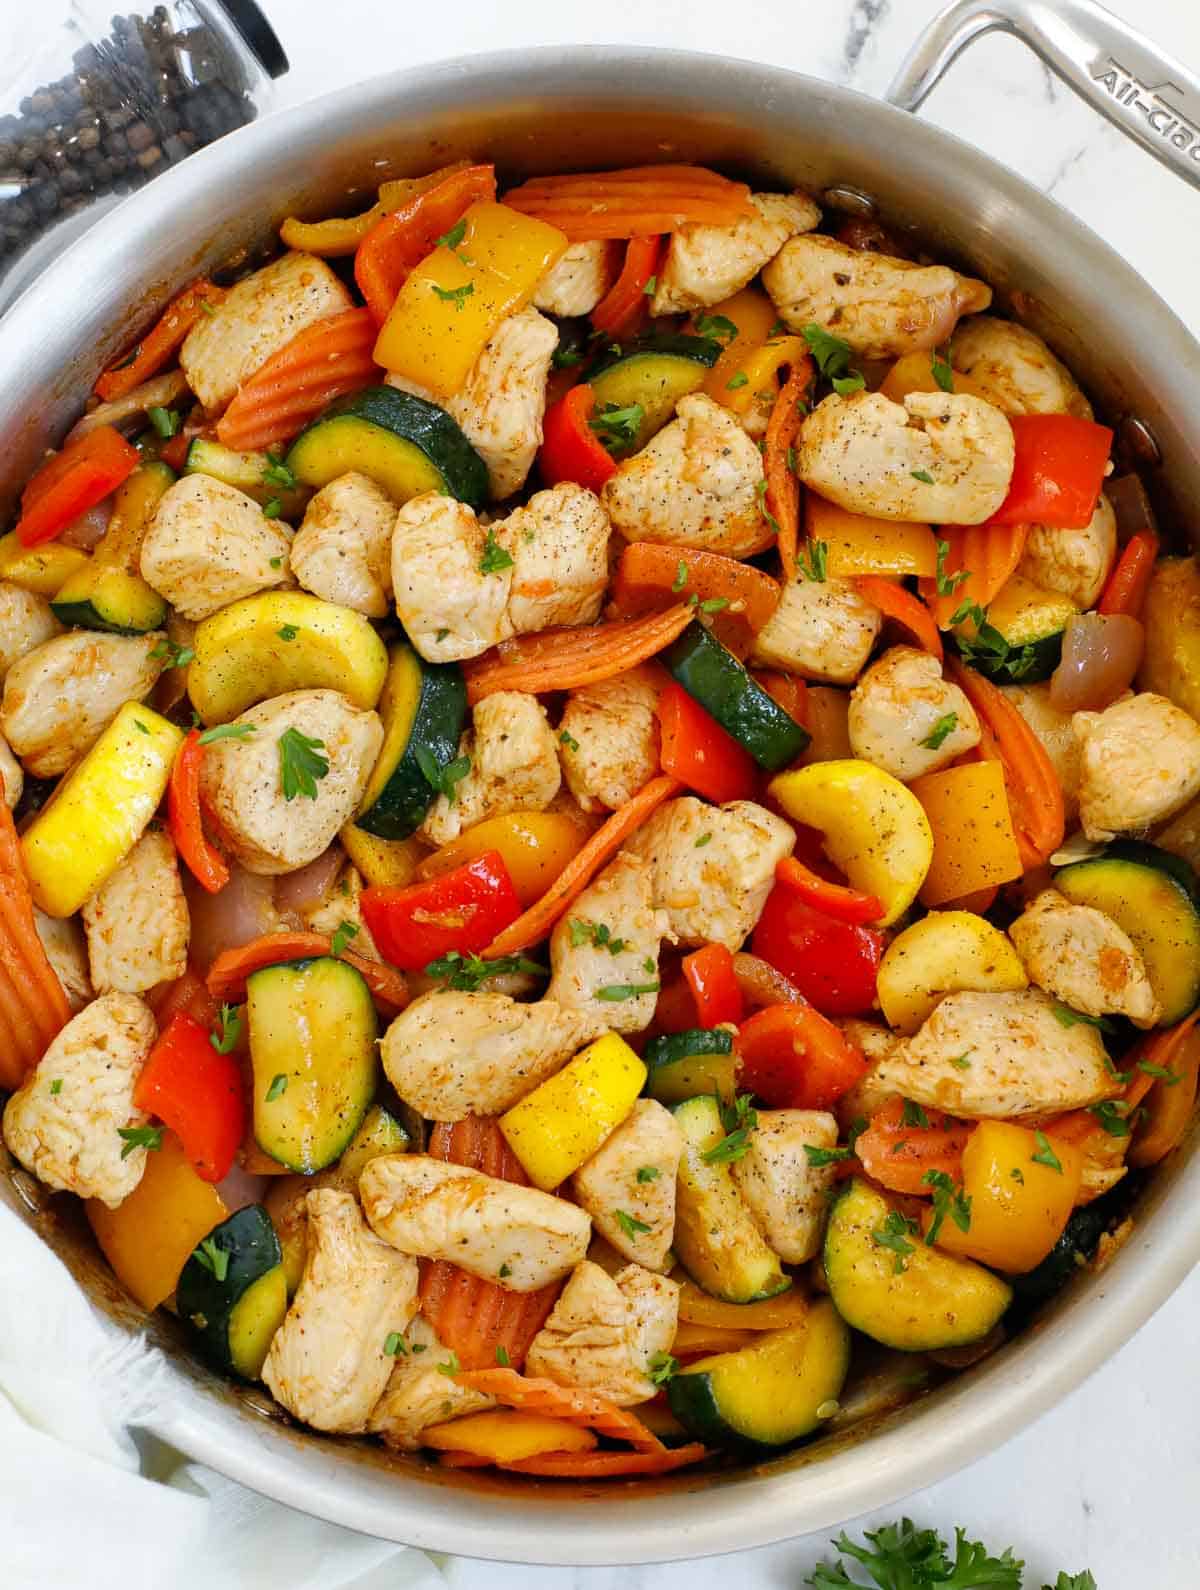 Healthy chicken and vegetable skillet topped with herbs.